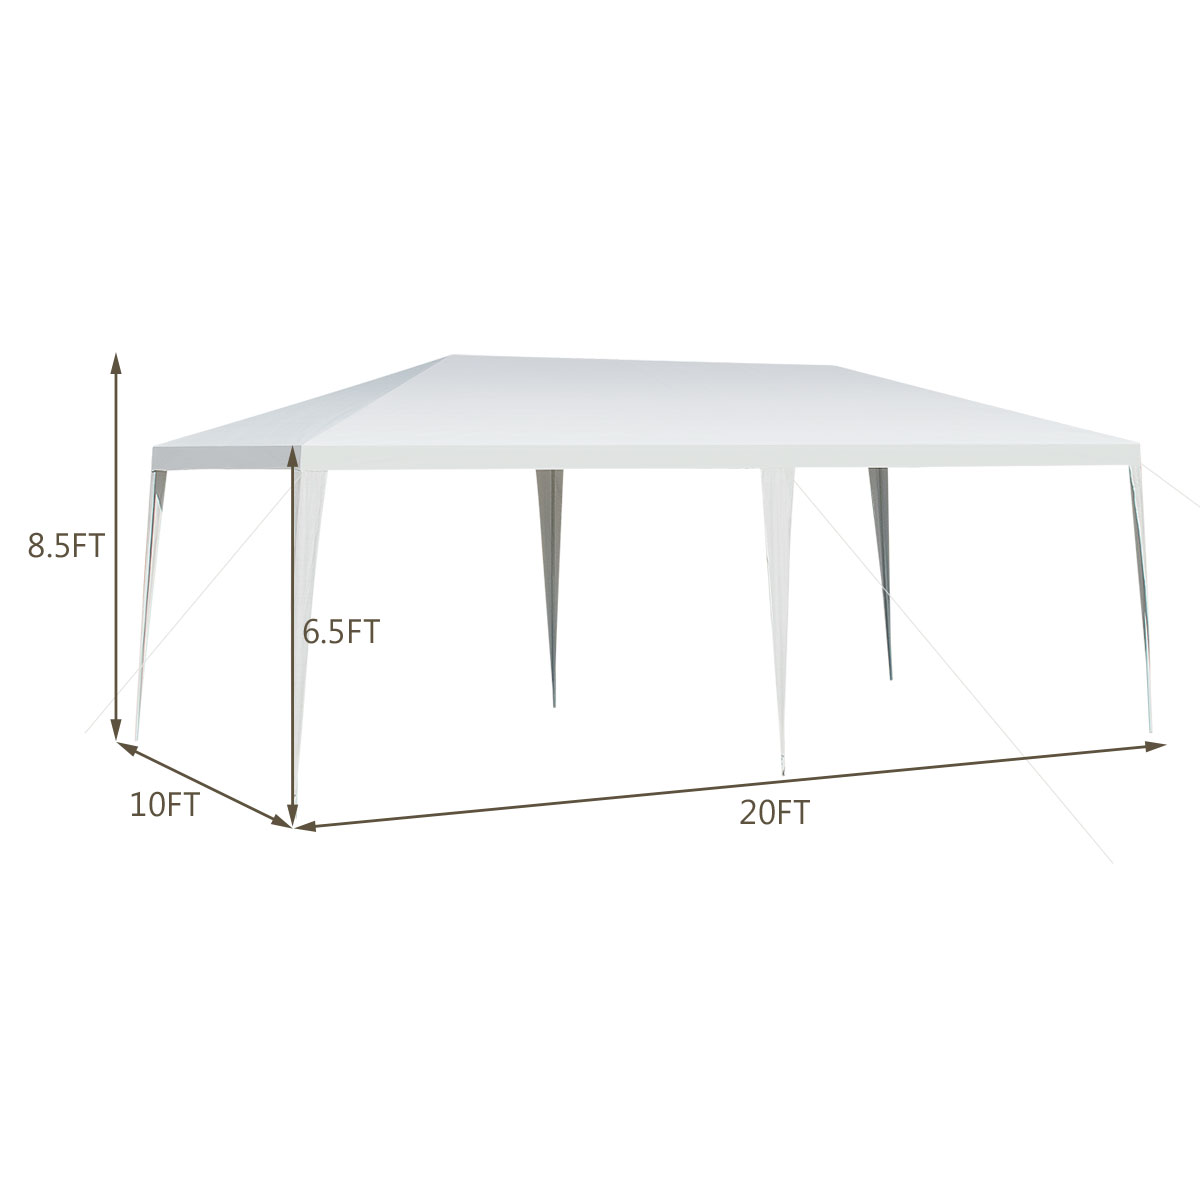 Costway 10'x20' Outdoor Party Wedding Tent Heavy Duty Canopy Pavilion - image 2 of 10